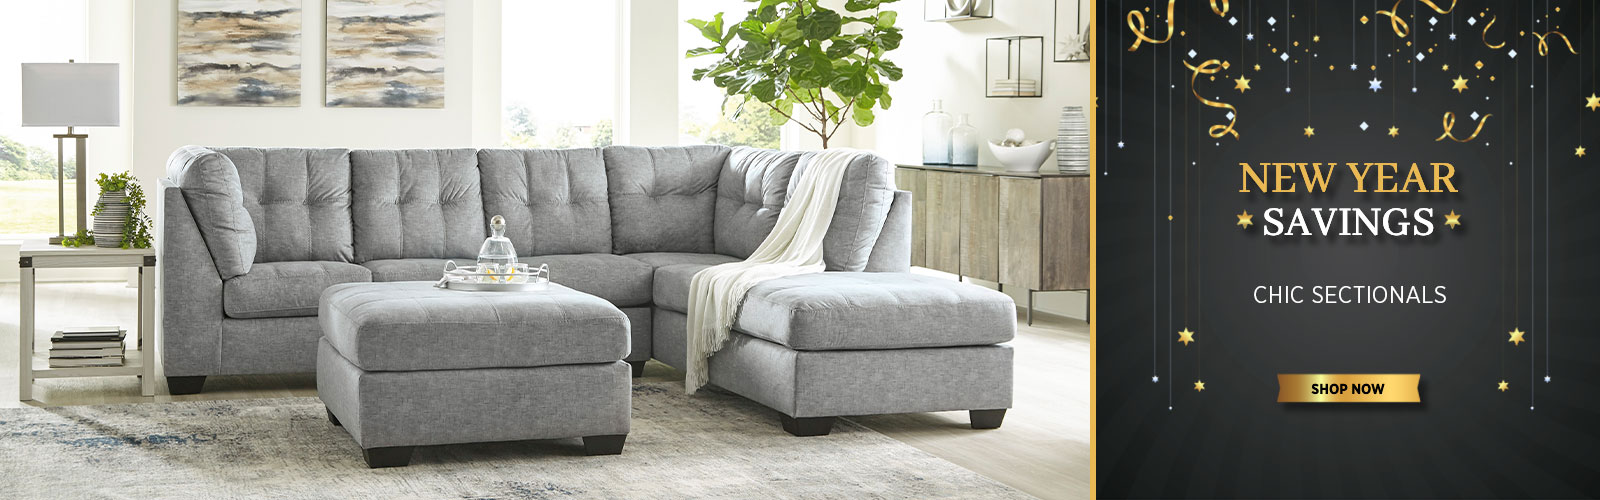 New Year's Savings - Chic Sectionals - Shop Now